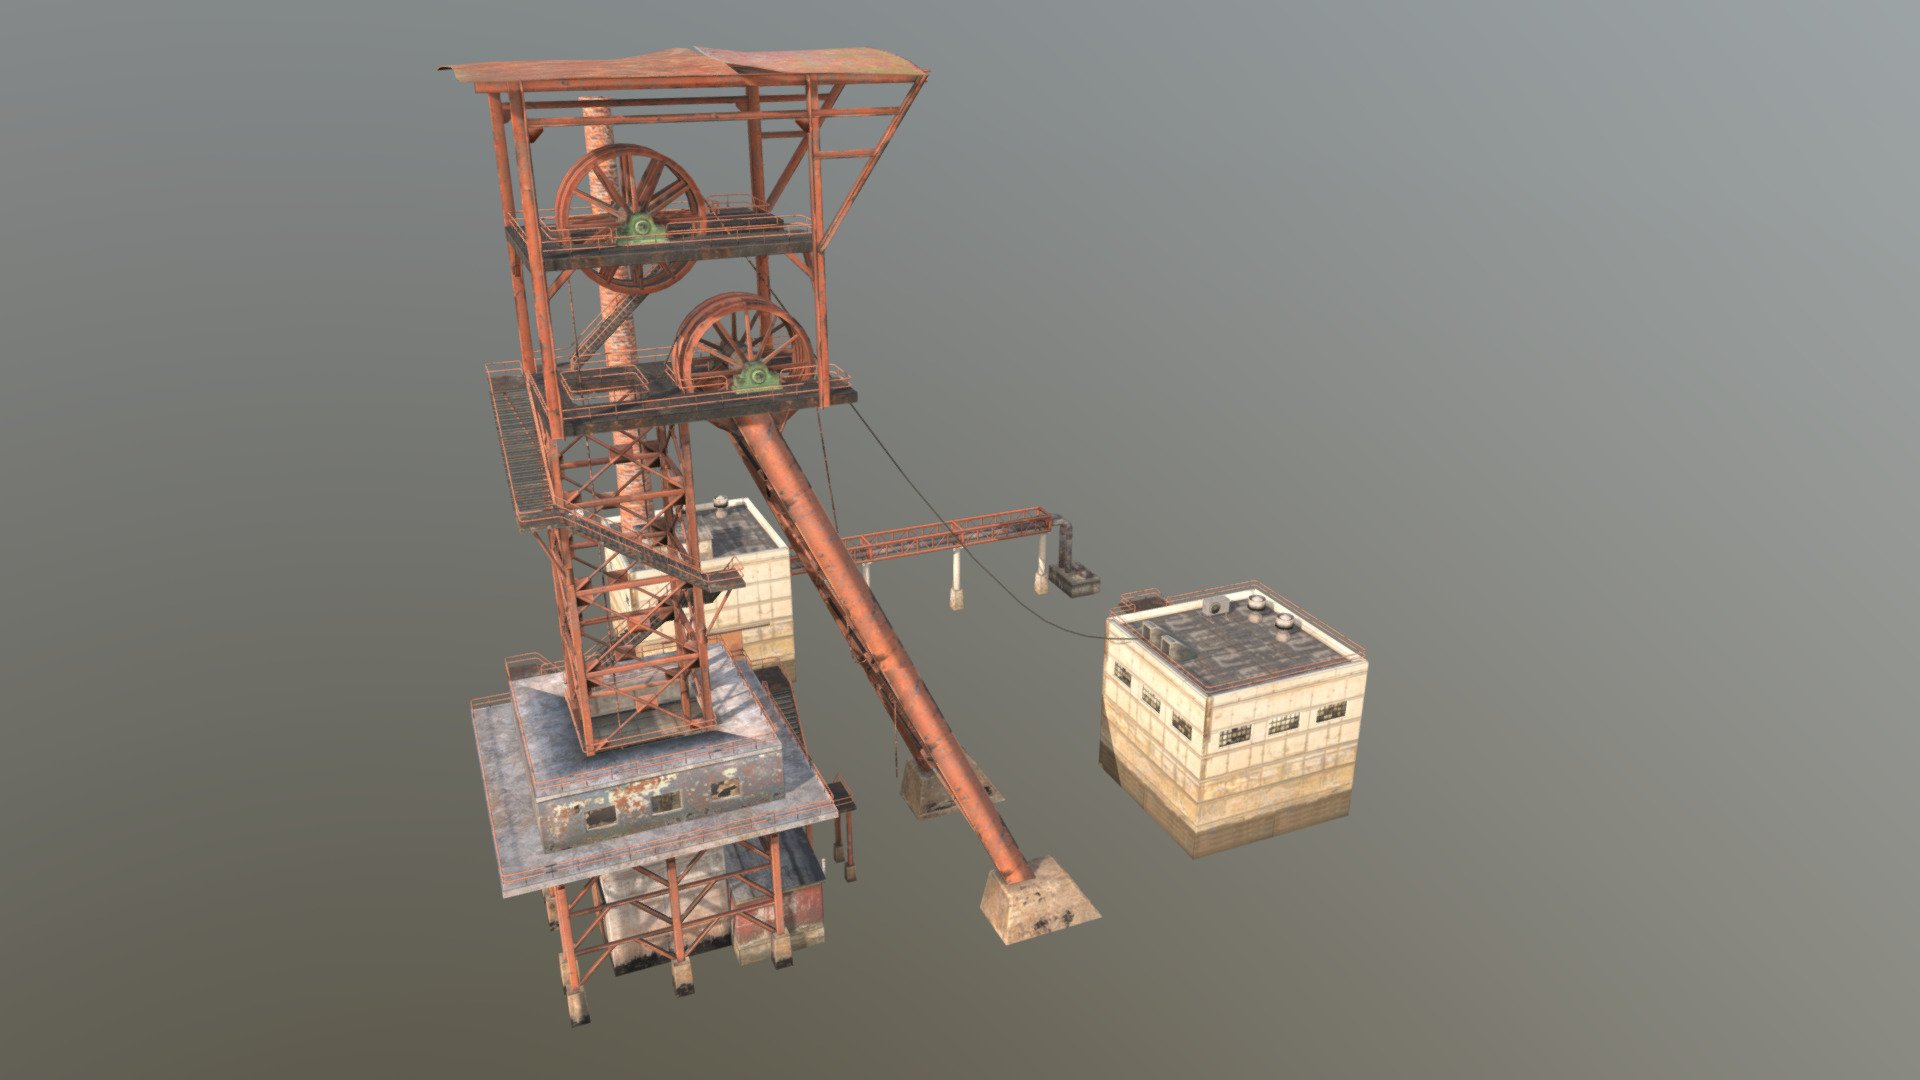 3D Mining Tower
The pack has highly detailed mining tower ready for use in your project. Just drag and drop prefabs into your scene and achieve beautiful results in no time. Available formats FBX, 3DS Max 2017



We are here to empower the creators. Please contact us via the [Contact US](https://aaanimators.com/#contact-area) page if you are having issues with our assets. 




The following document provides a highly detailed description of the asset:
[READ ME]()




**Mesh complexities:**


Mining01 45712 verts; 48144 tris; 7 submeshes uv

Vent 715 verts; 808 tris uv



Includes 8 sets of textures with 2 materials:



● Diffuse

● Normal - Low Poly Mining Tower - Buy Royalty Free 3D model by aaanimators 3d model